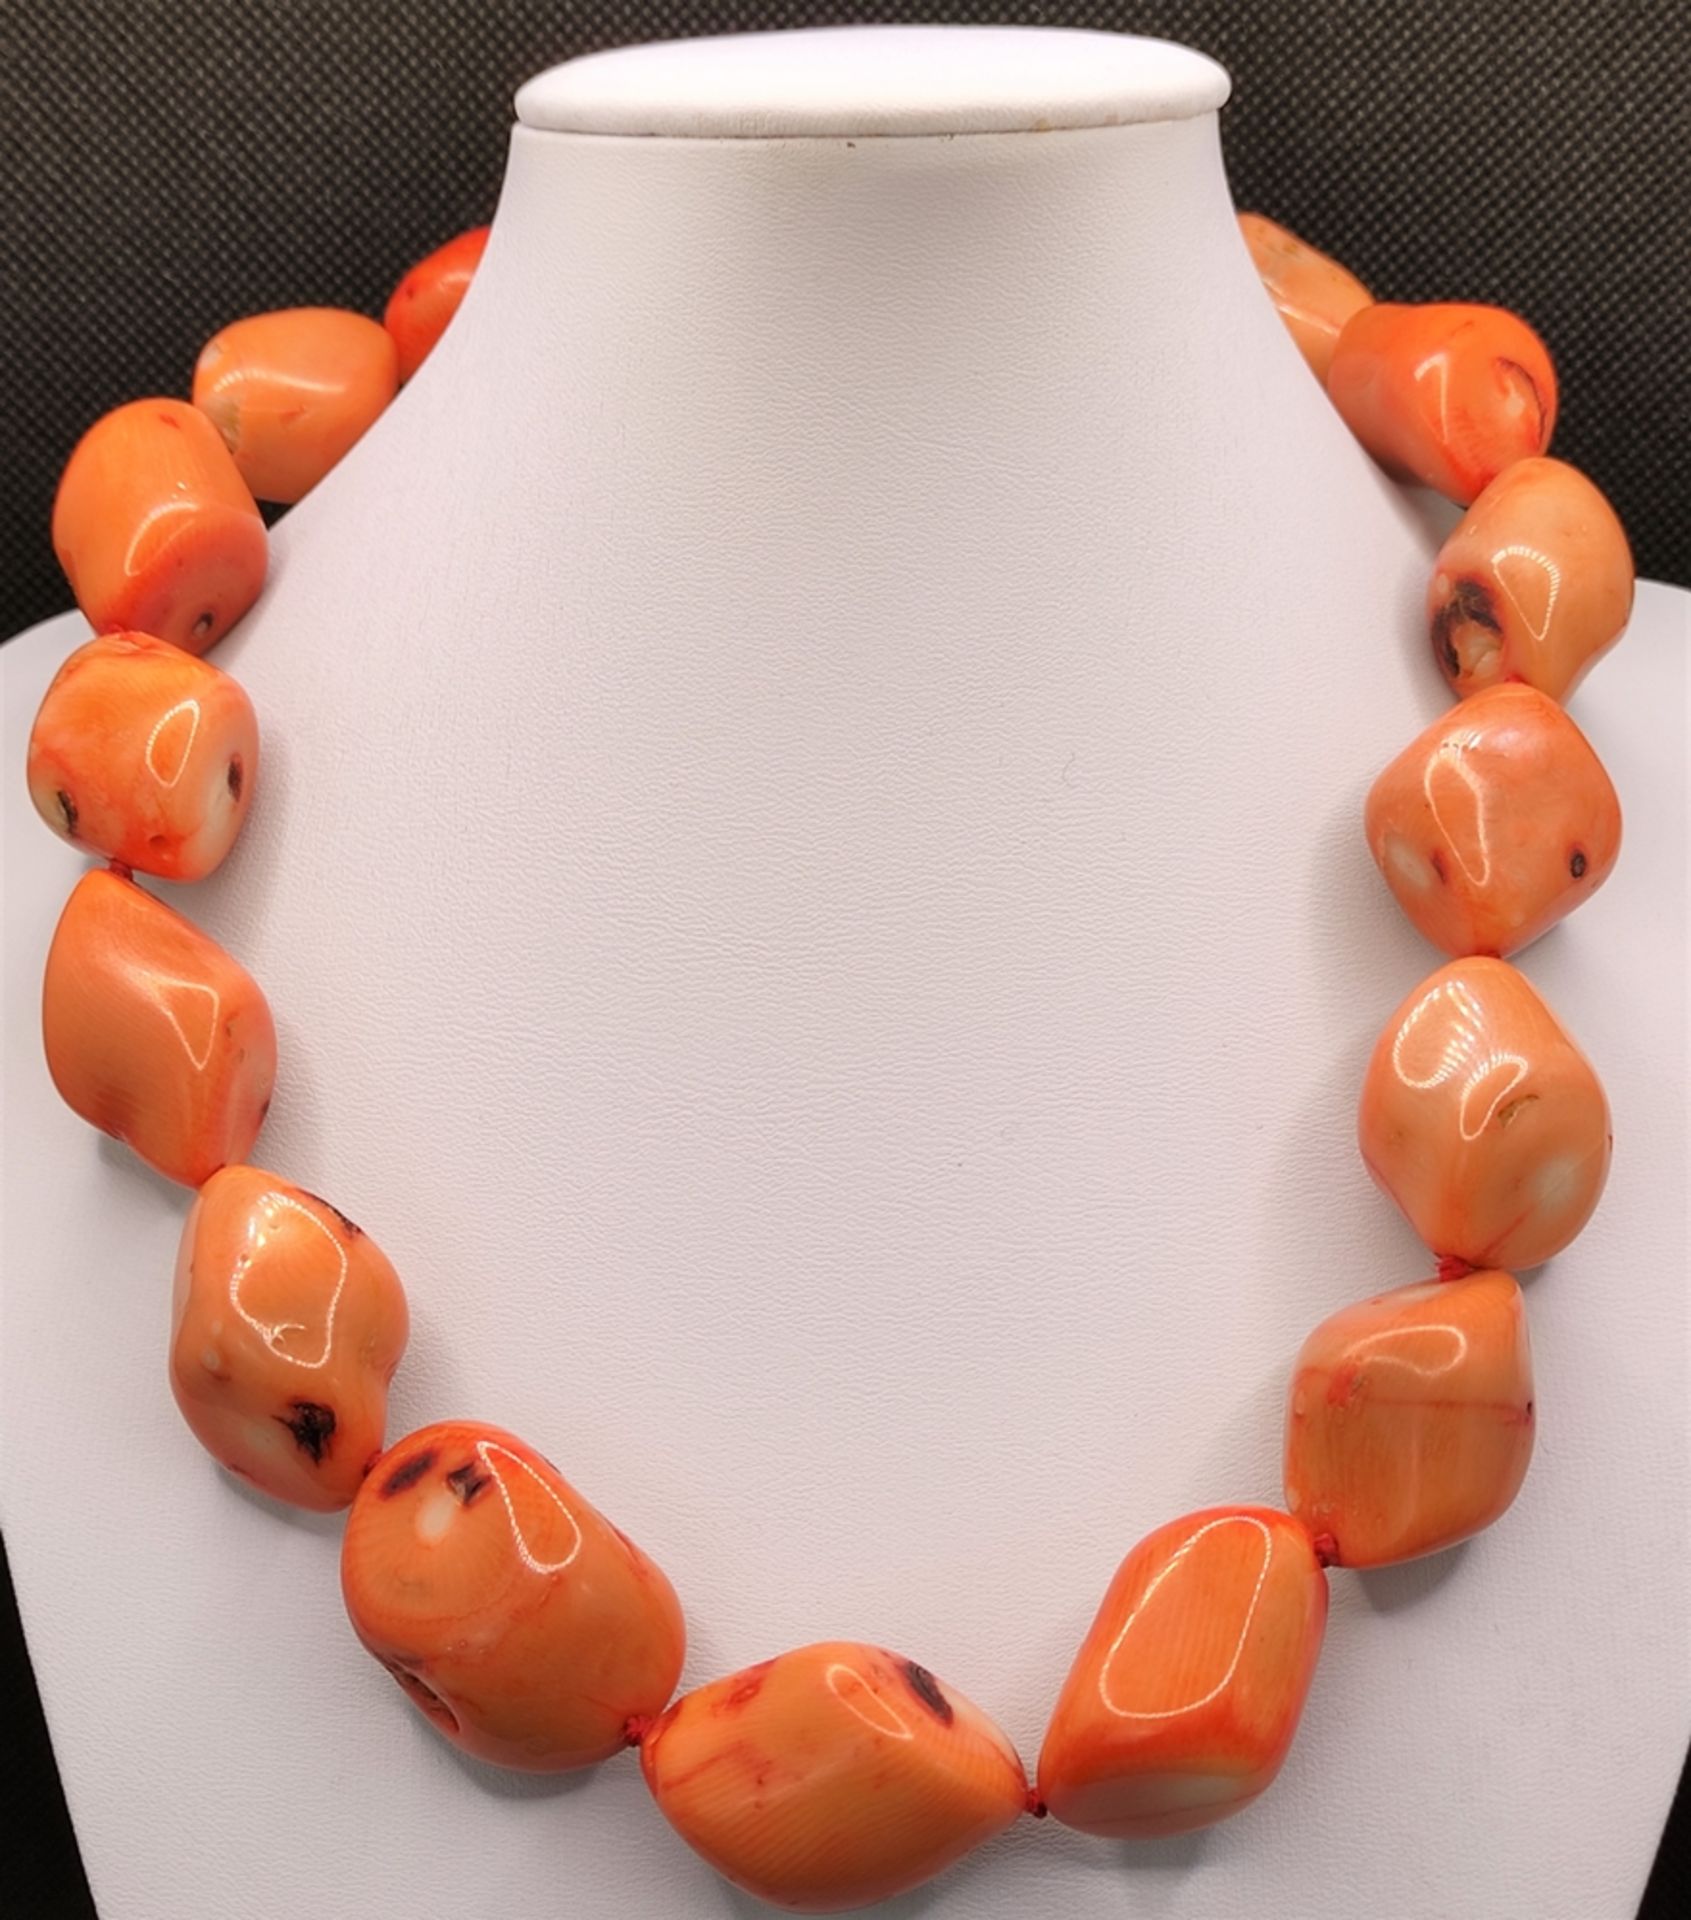 Coral necklace, made of coral pieces, Italy, ring clasp, length 44cm - Image 2 of 4